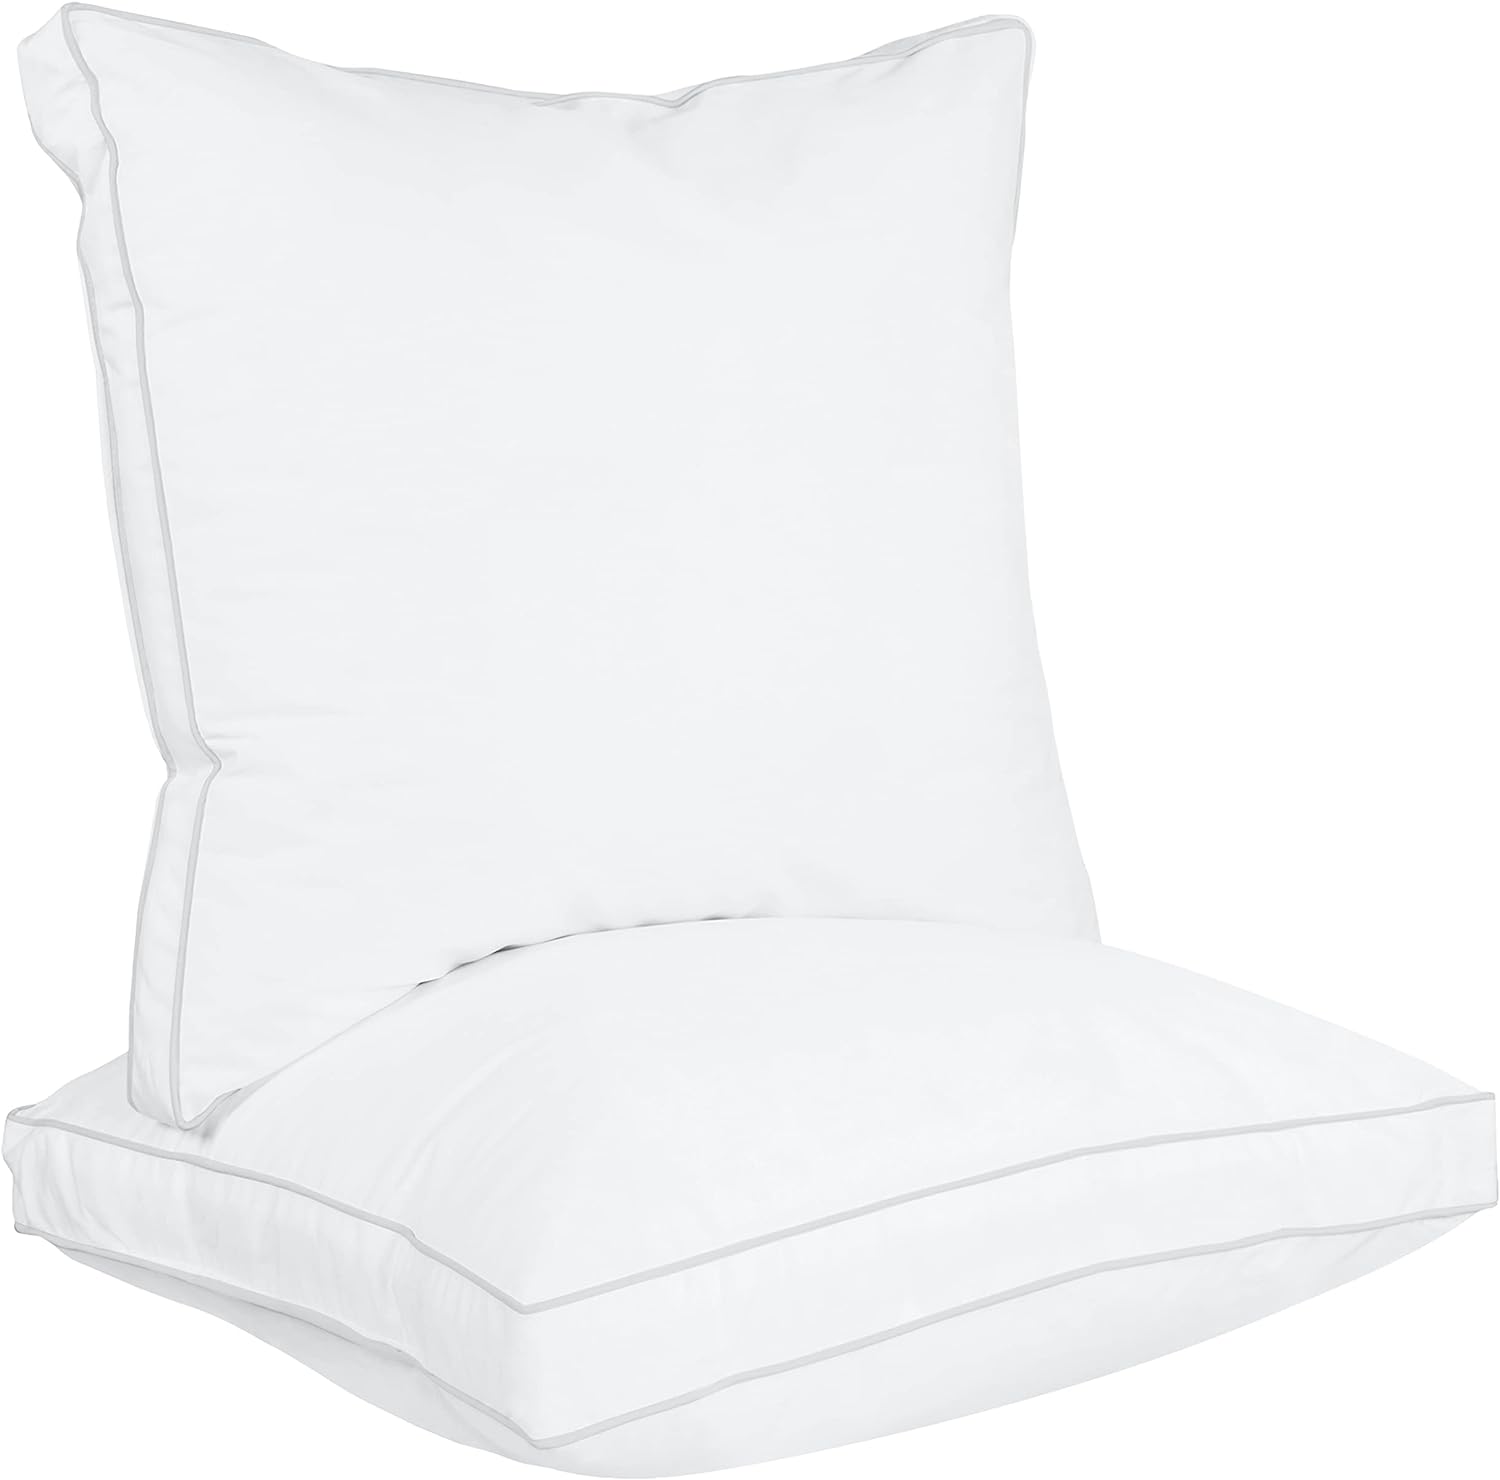 Utopia Bedding Bed Pillows for Sleeping European Size (White), Set of 2, Cooling Hotel Quality, Gusseted Pillow for Back, Stomach or Side Sleepers